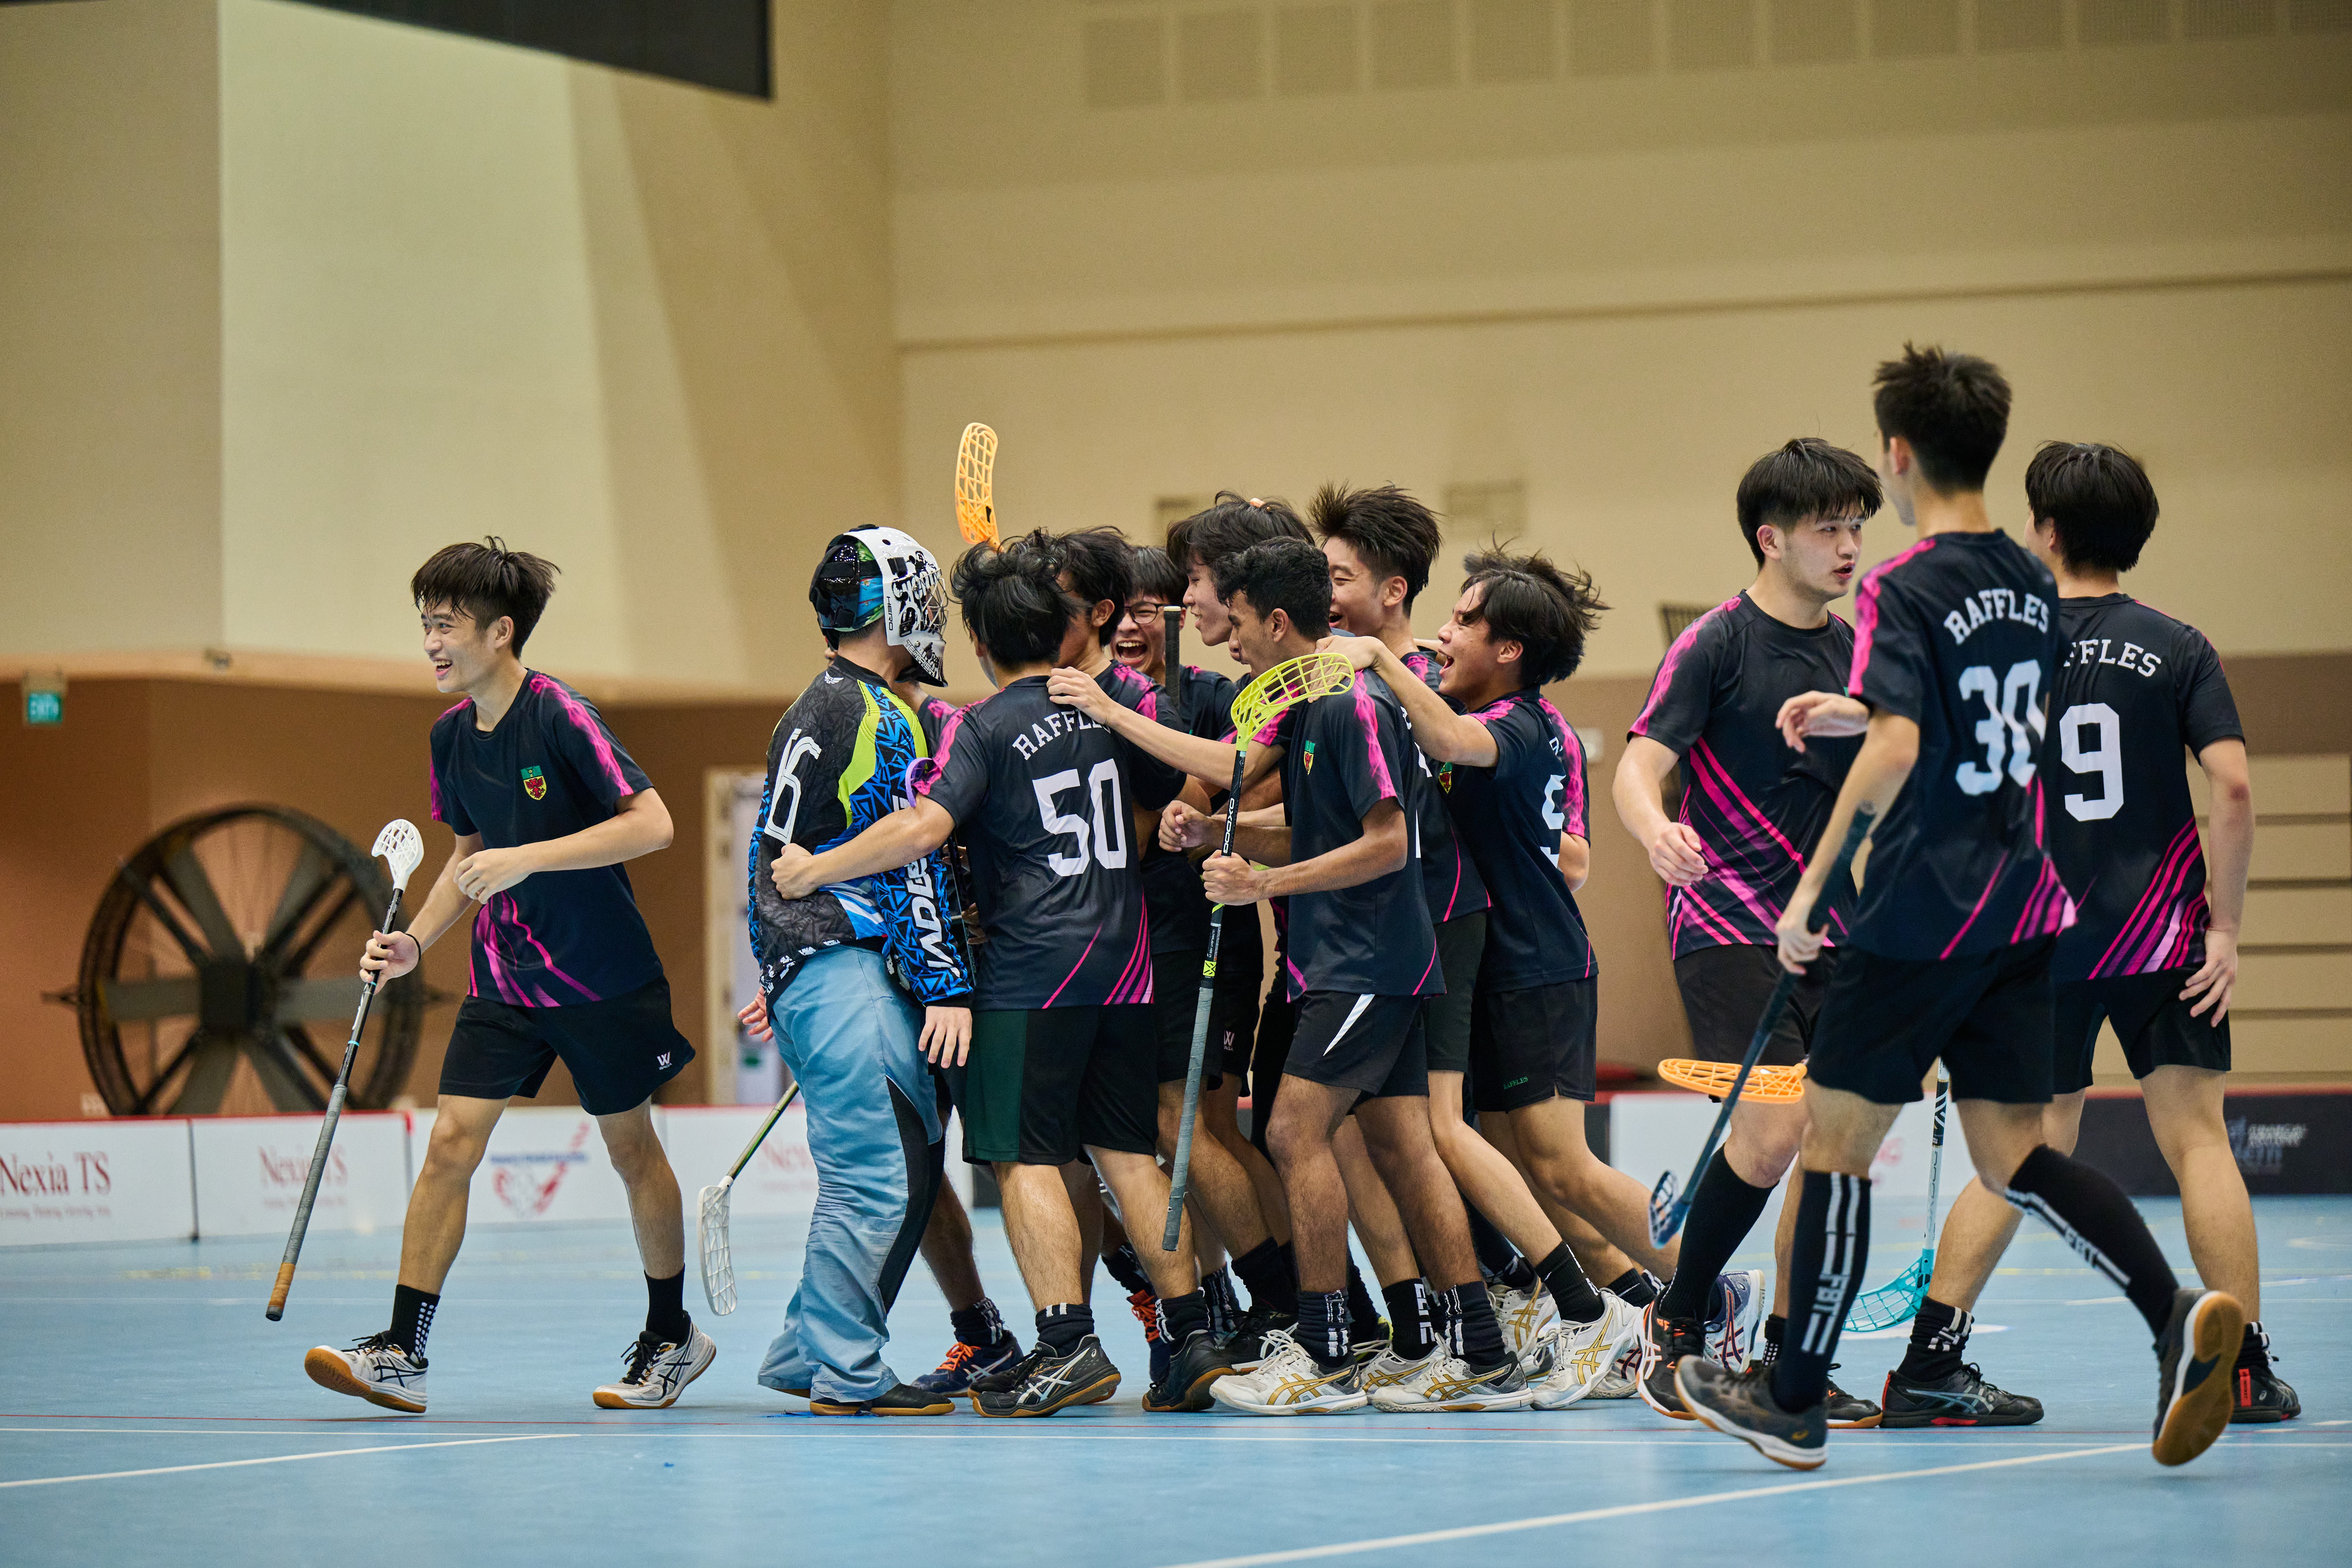 20220519_20220519 SSSC Floorball National A Div Boys Semi Finals Raffles Junior College Vs Anglo-Chinese Junior College_Siaw Woon Chong_0033